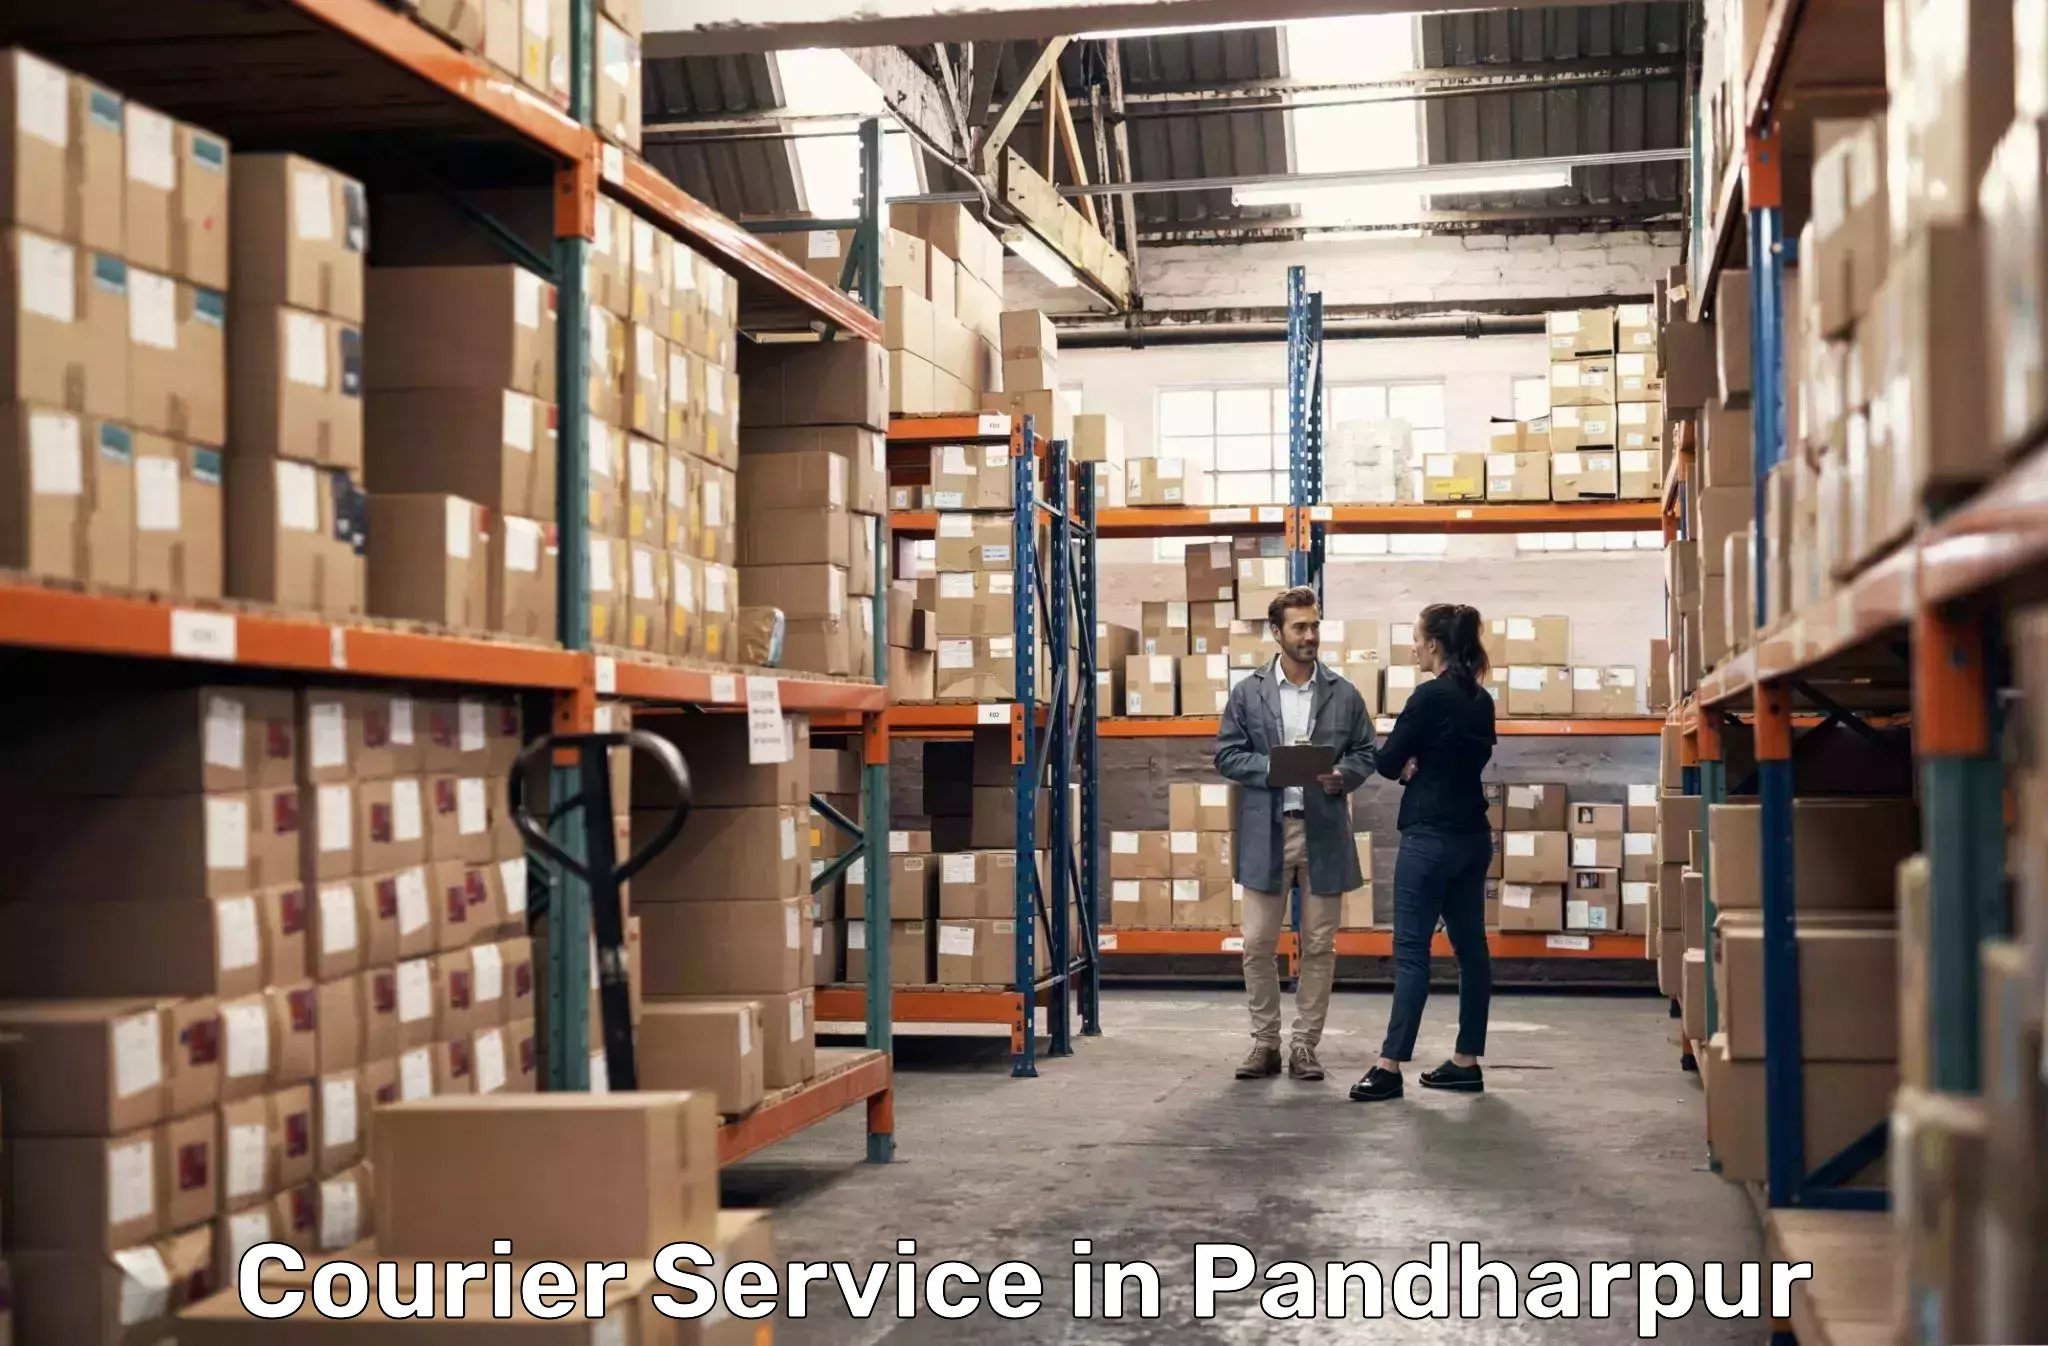 Express delivery capabilities in Pandharpur